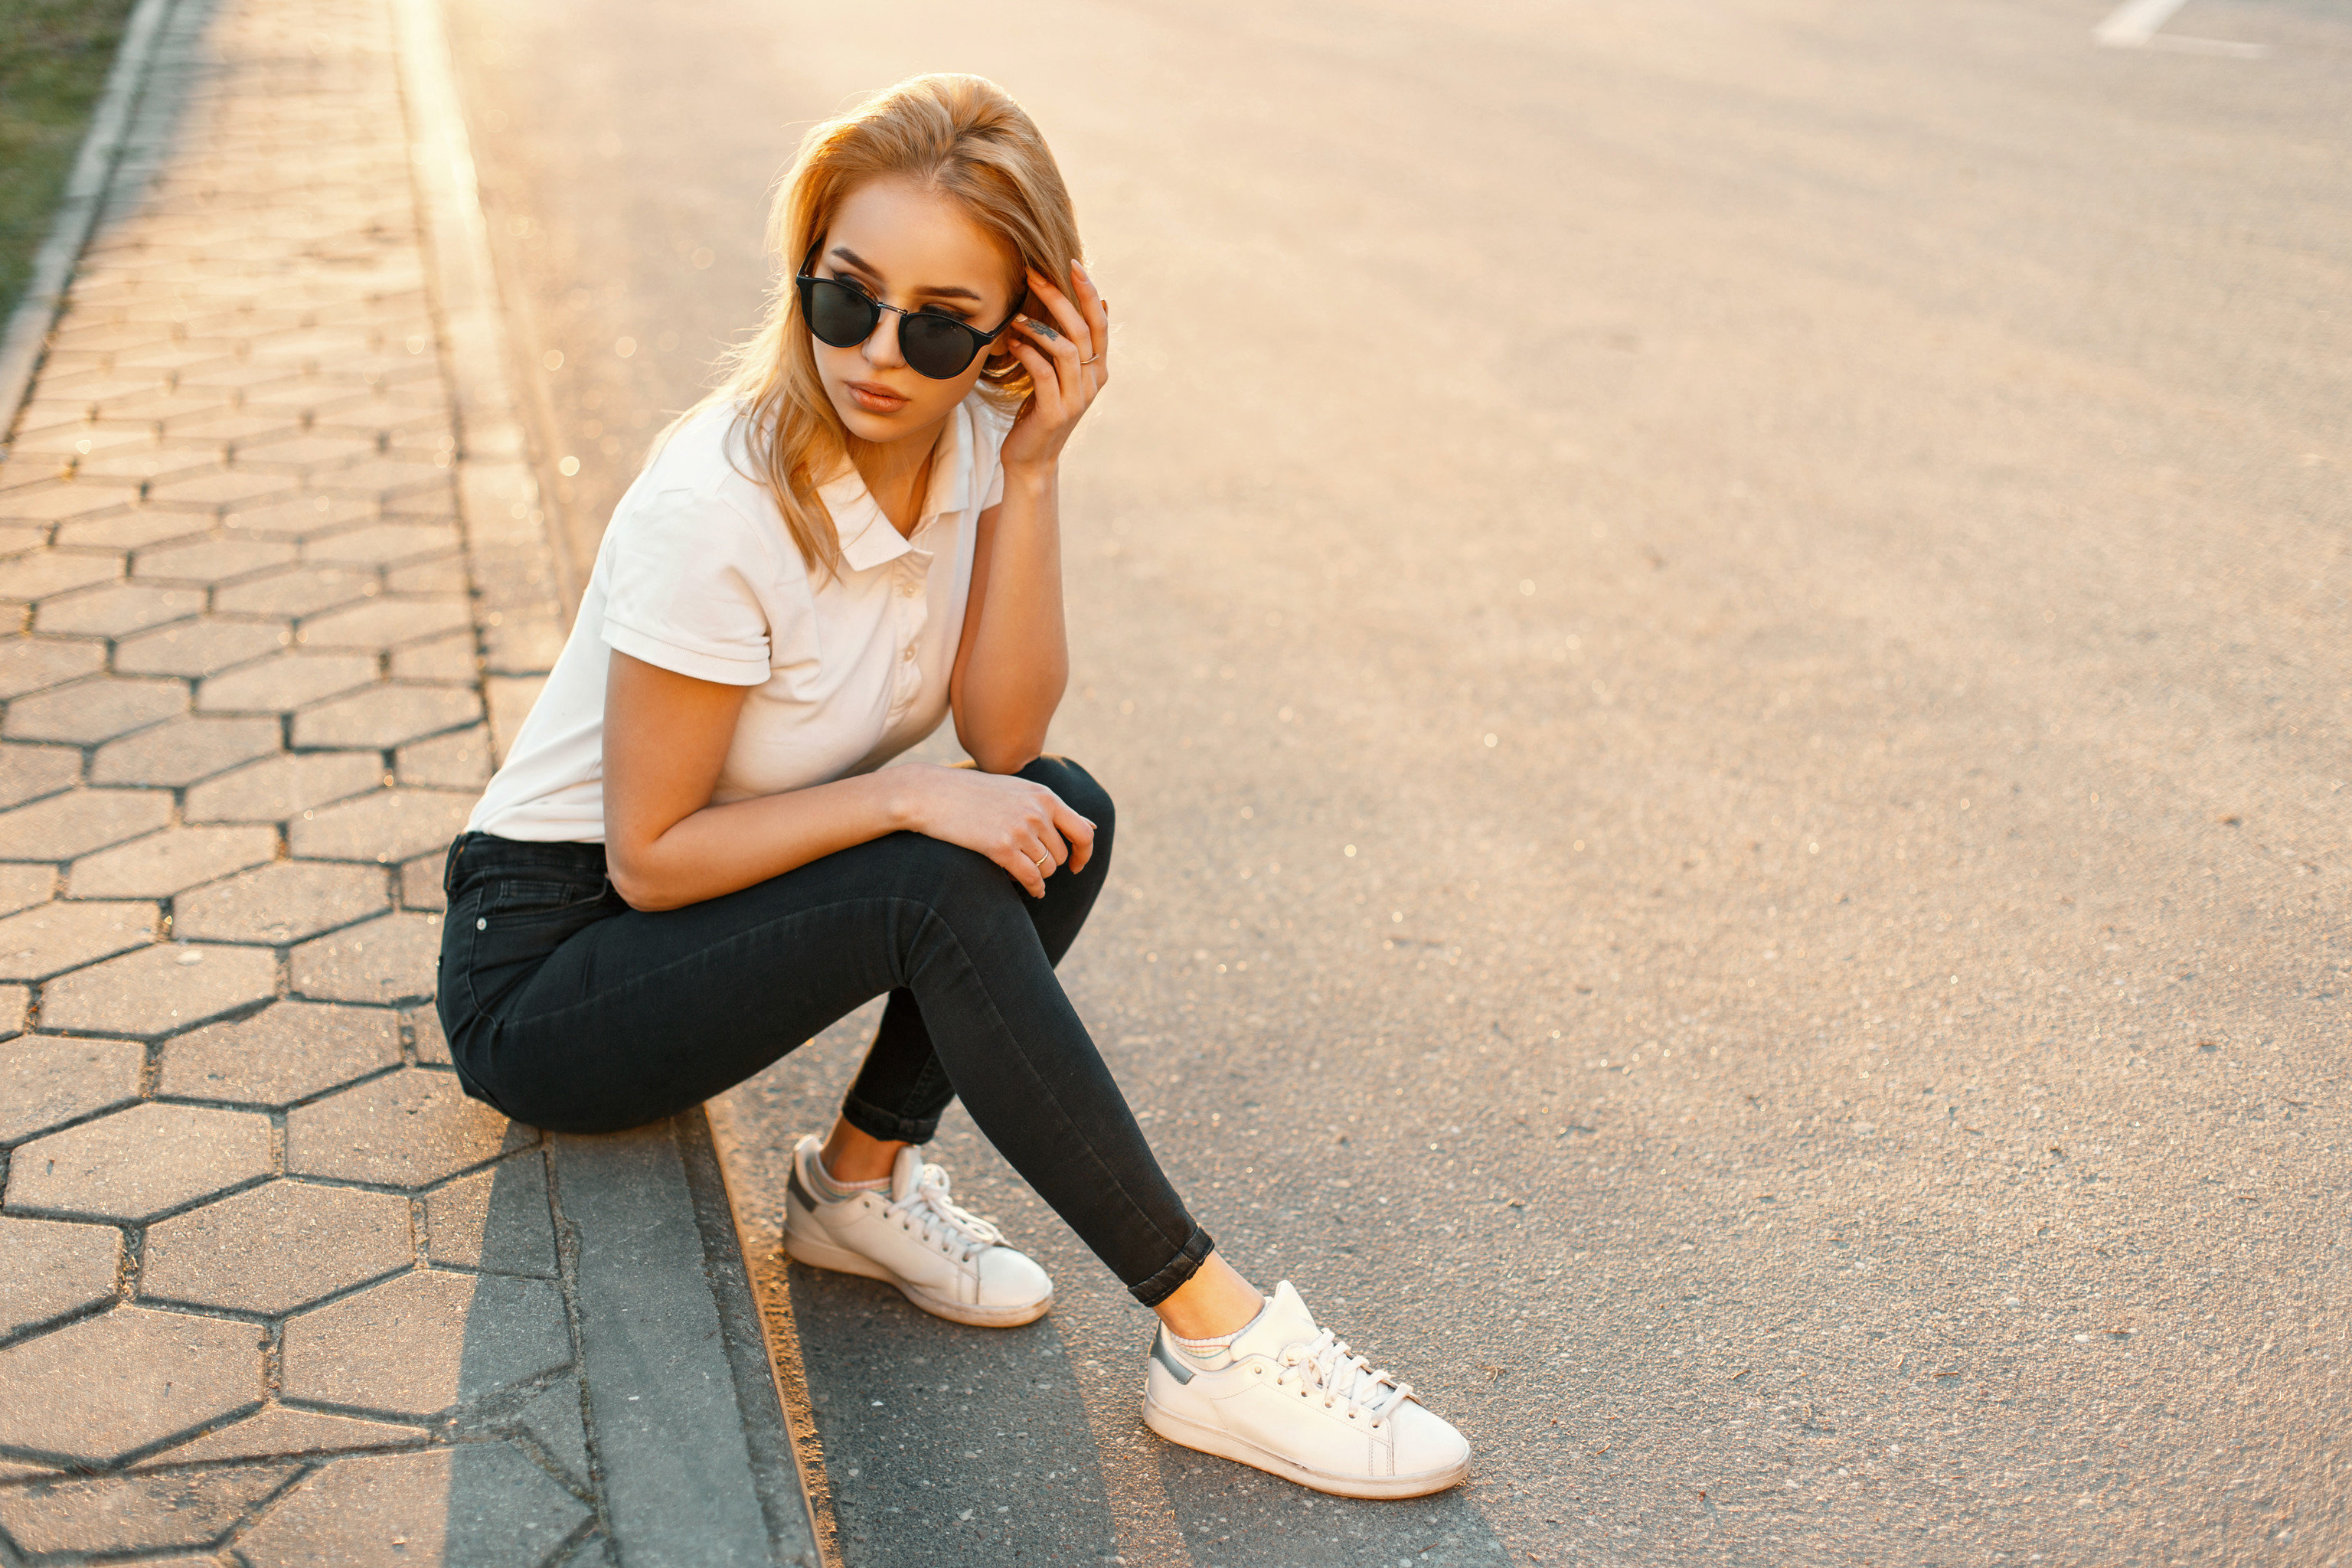 womens best white sneakers